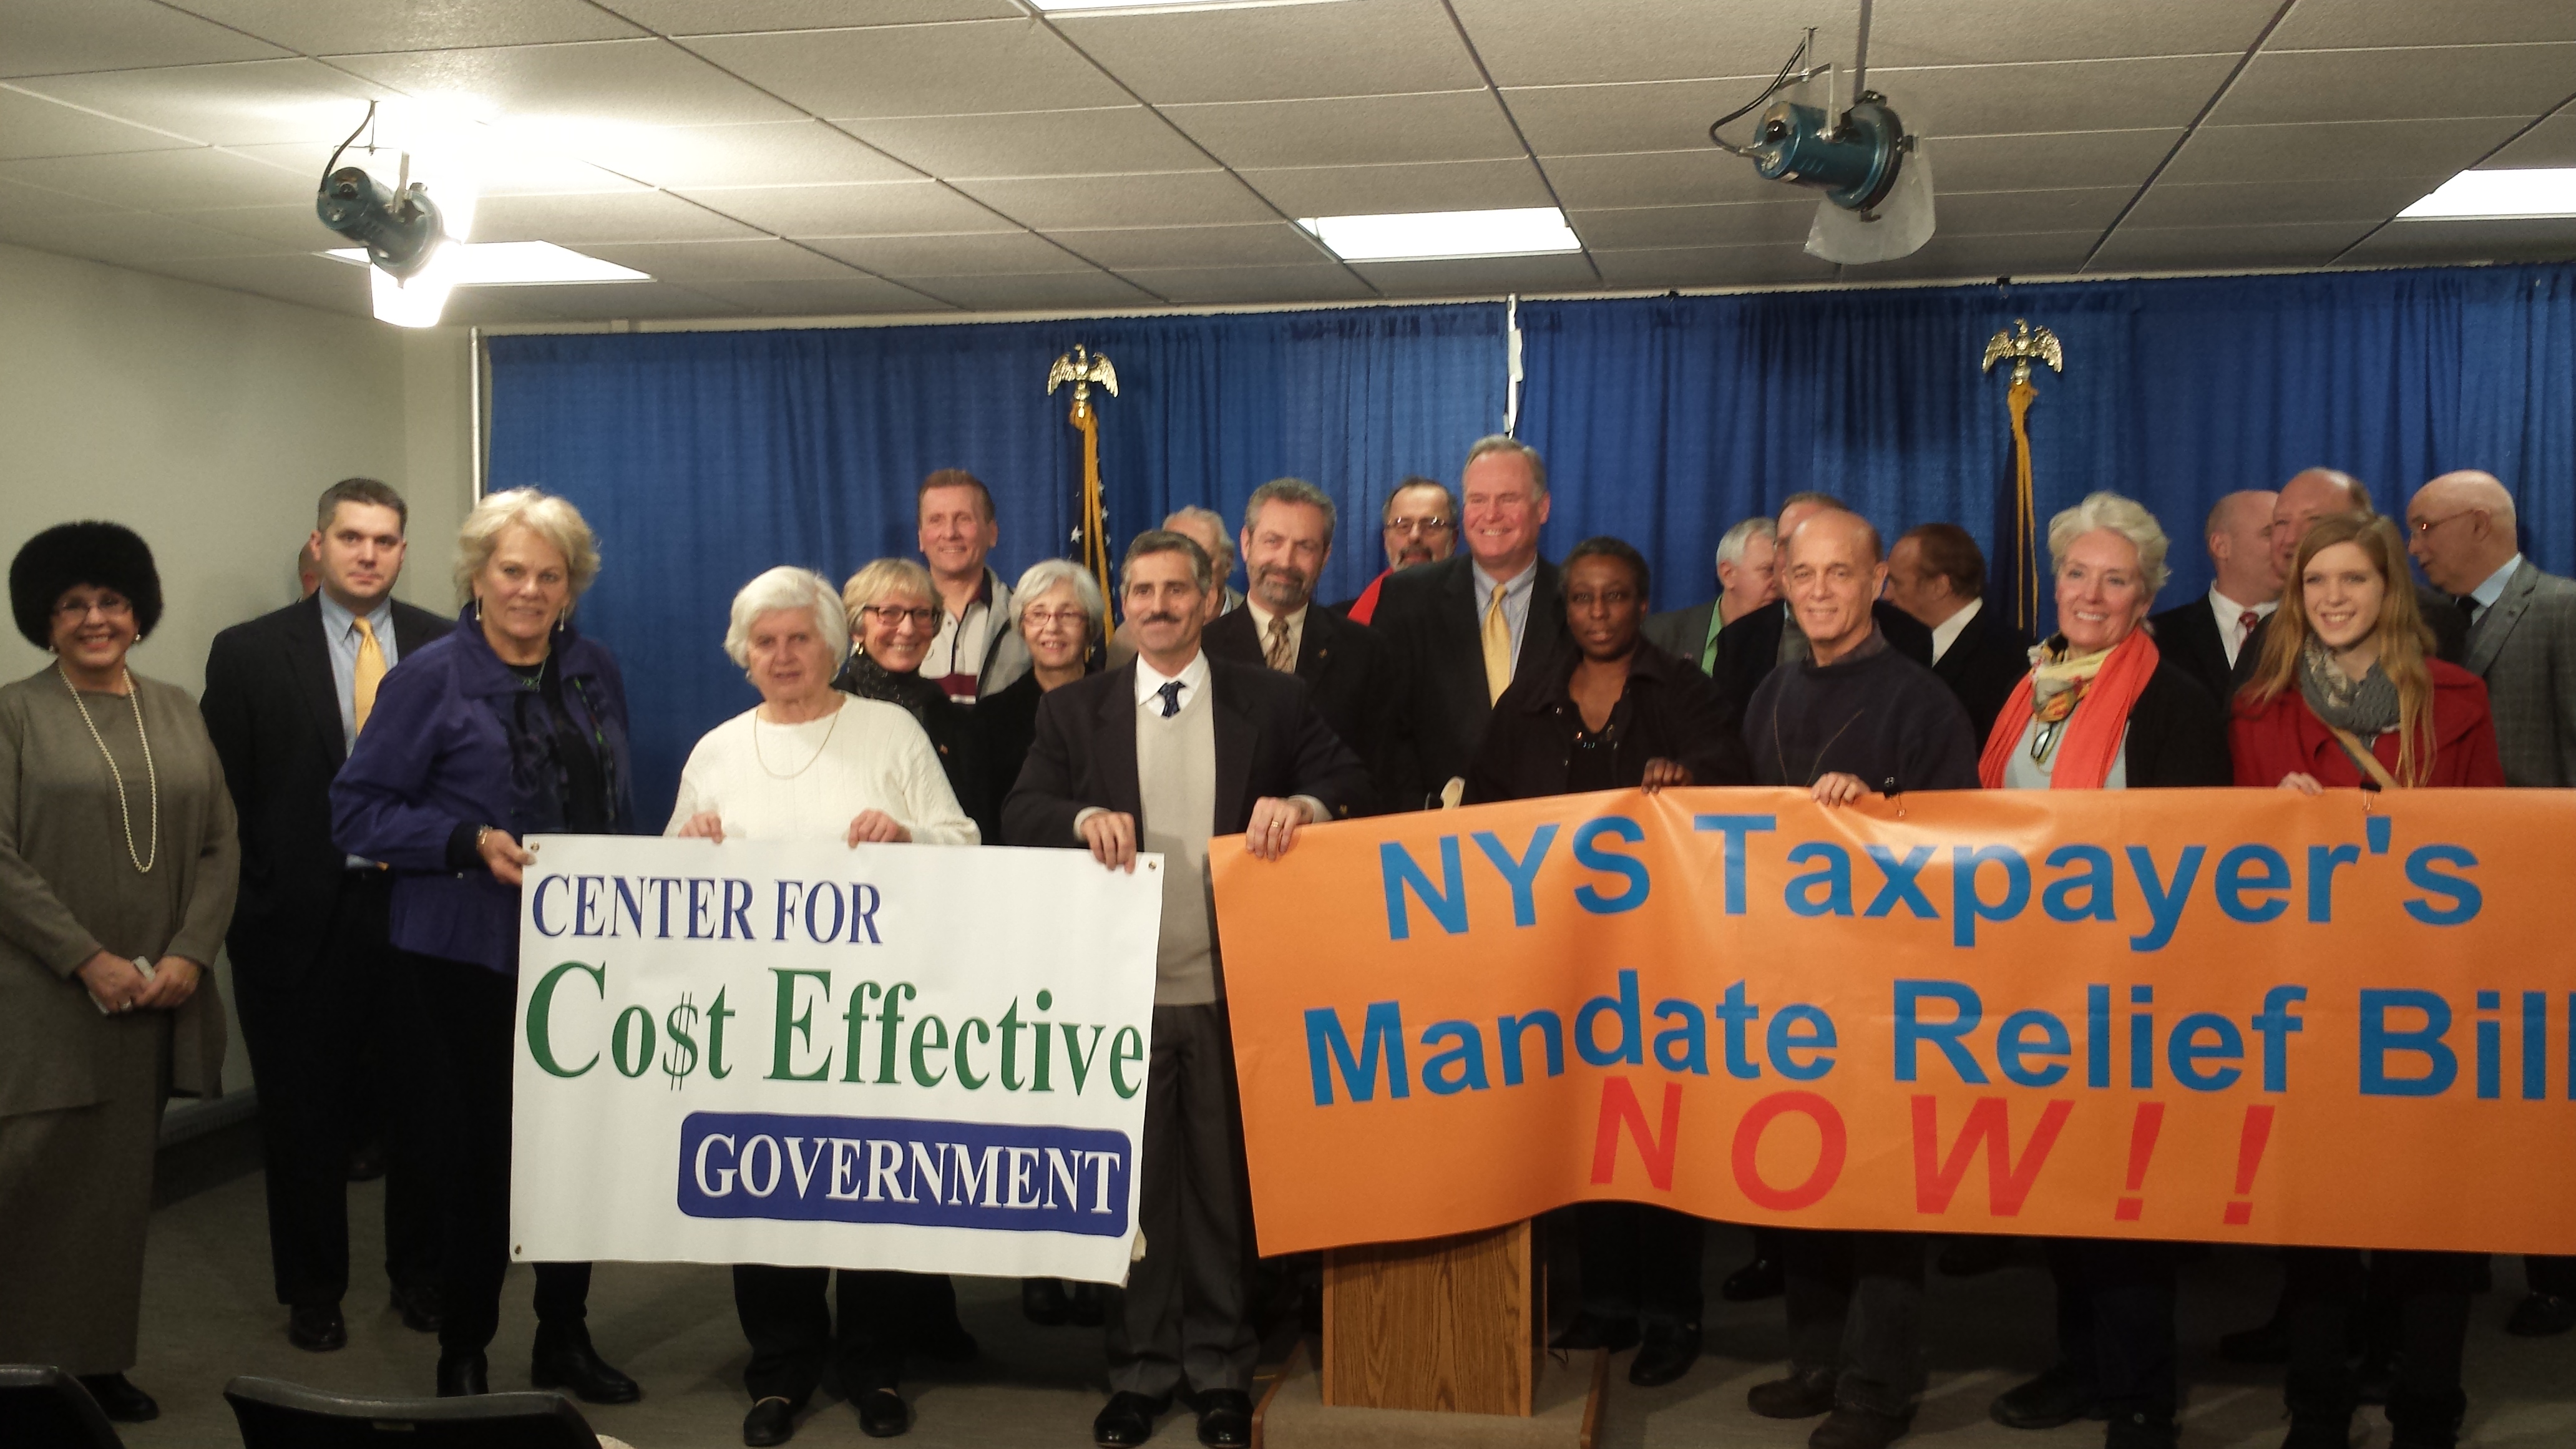 Members Of The Center For Cost Effective Government Joined With Taxpayer Advocates Across The State To Support Assemblyman Fitzpatrick's Mandate Relief Bill